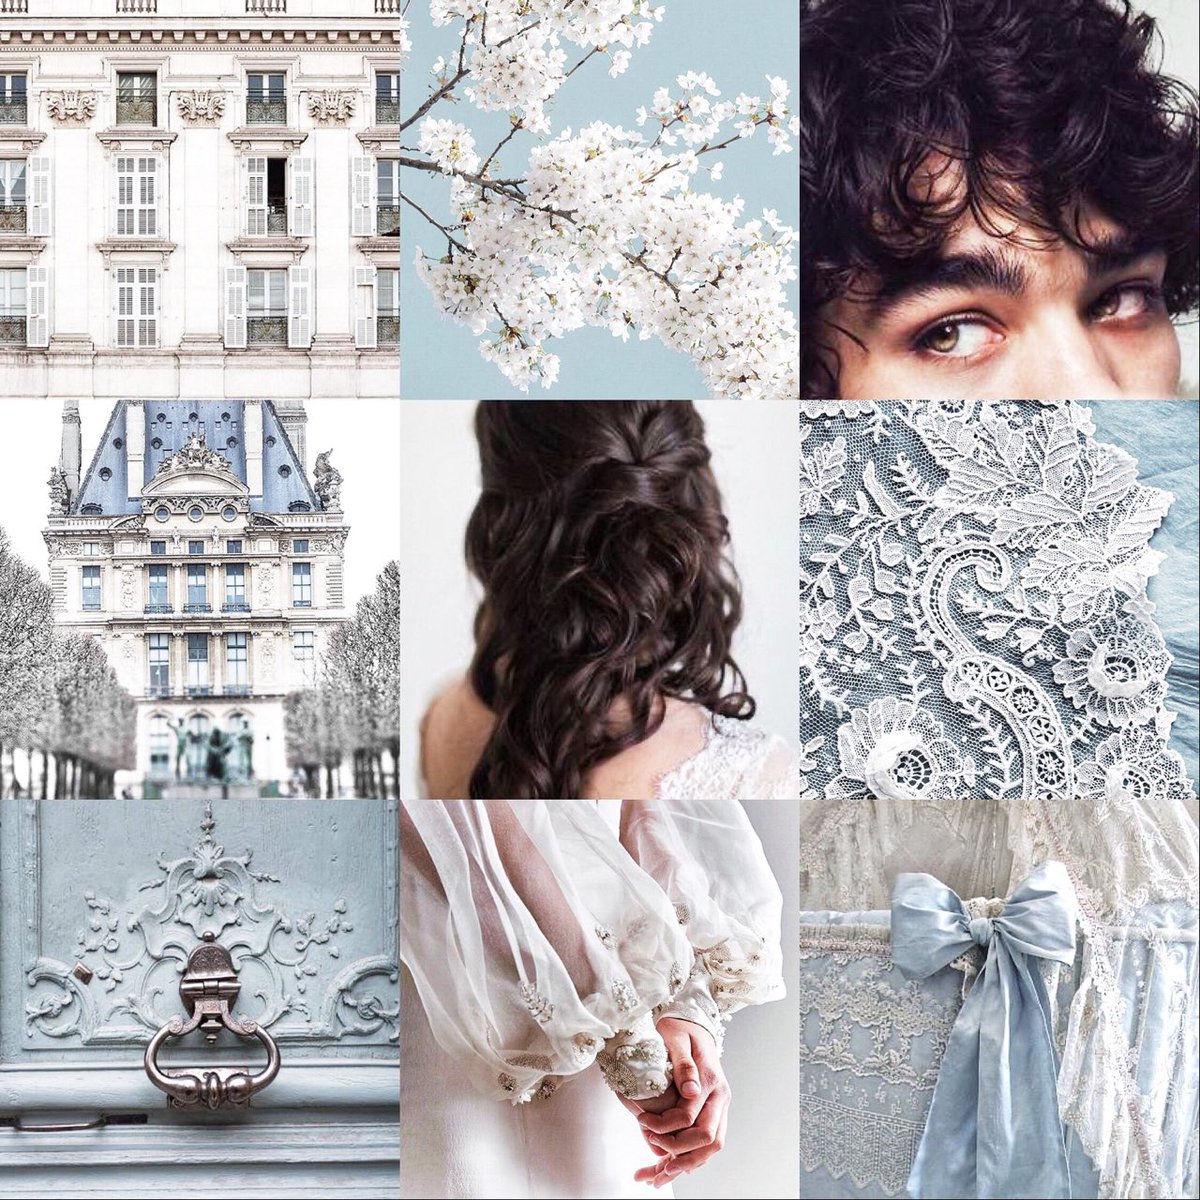 Just declared my second NaNo projectI feel like I talk about These Subtle Fires ( #VictorianWIP) a lot but I haven’t actually introduced it, so let this double as a WIP intro thread 